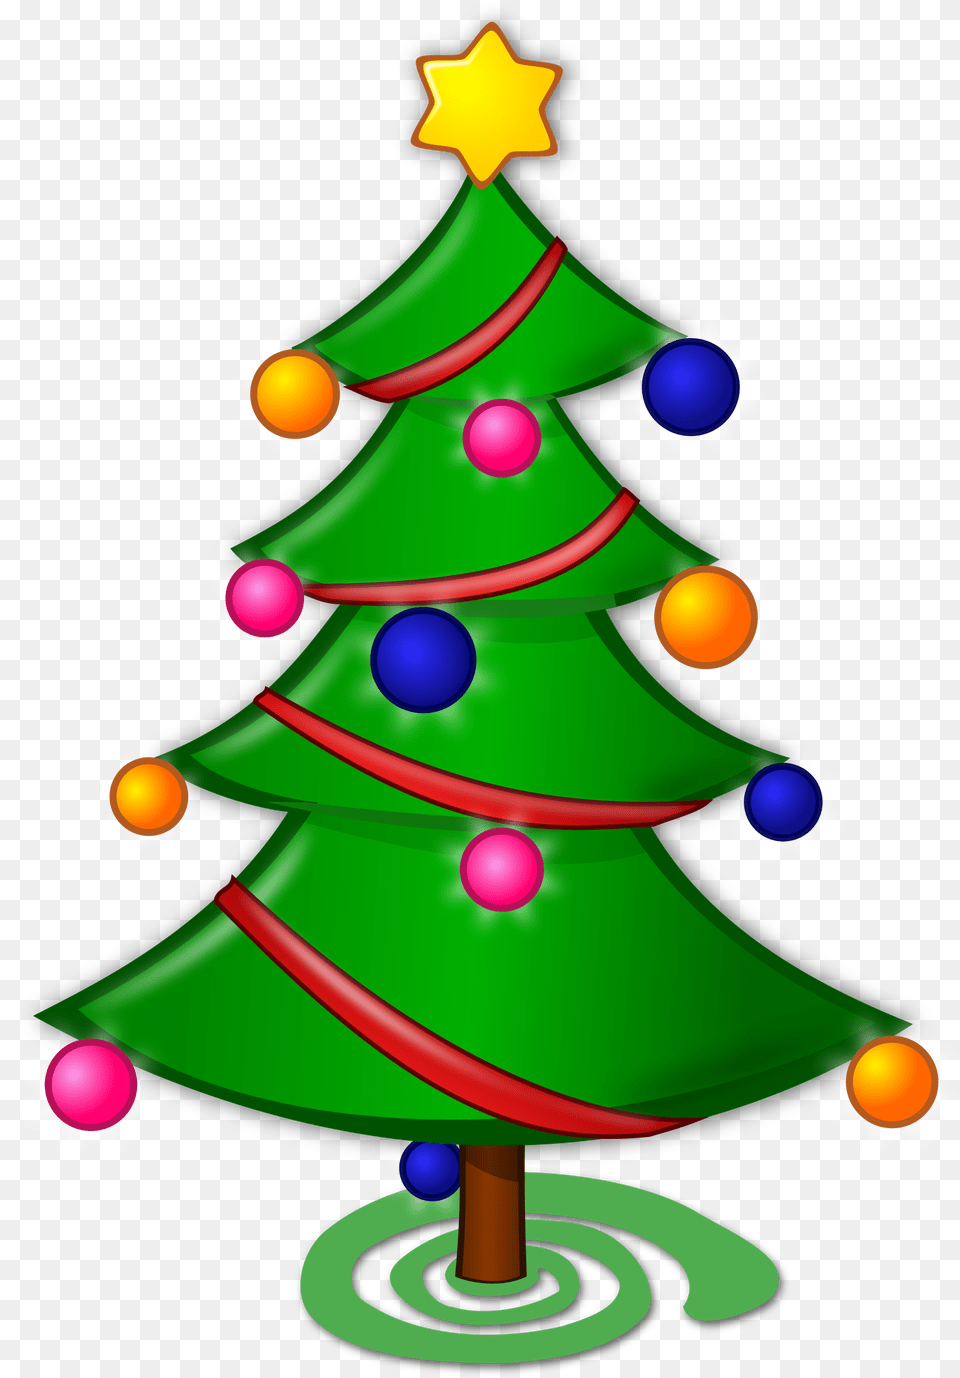 Clip Art Christmas Tree Cutting Clipart New Year Pencil, Christmas Decorations, Festival, Nature, Outdoors Png Image